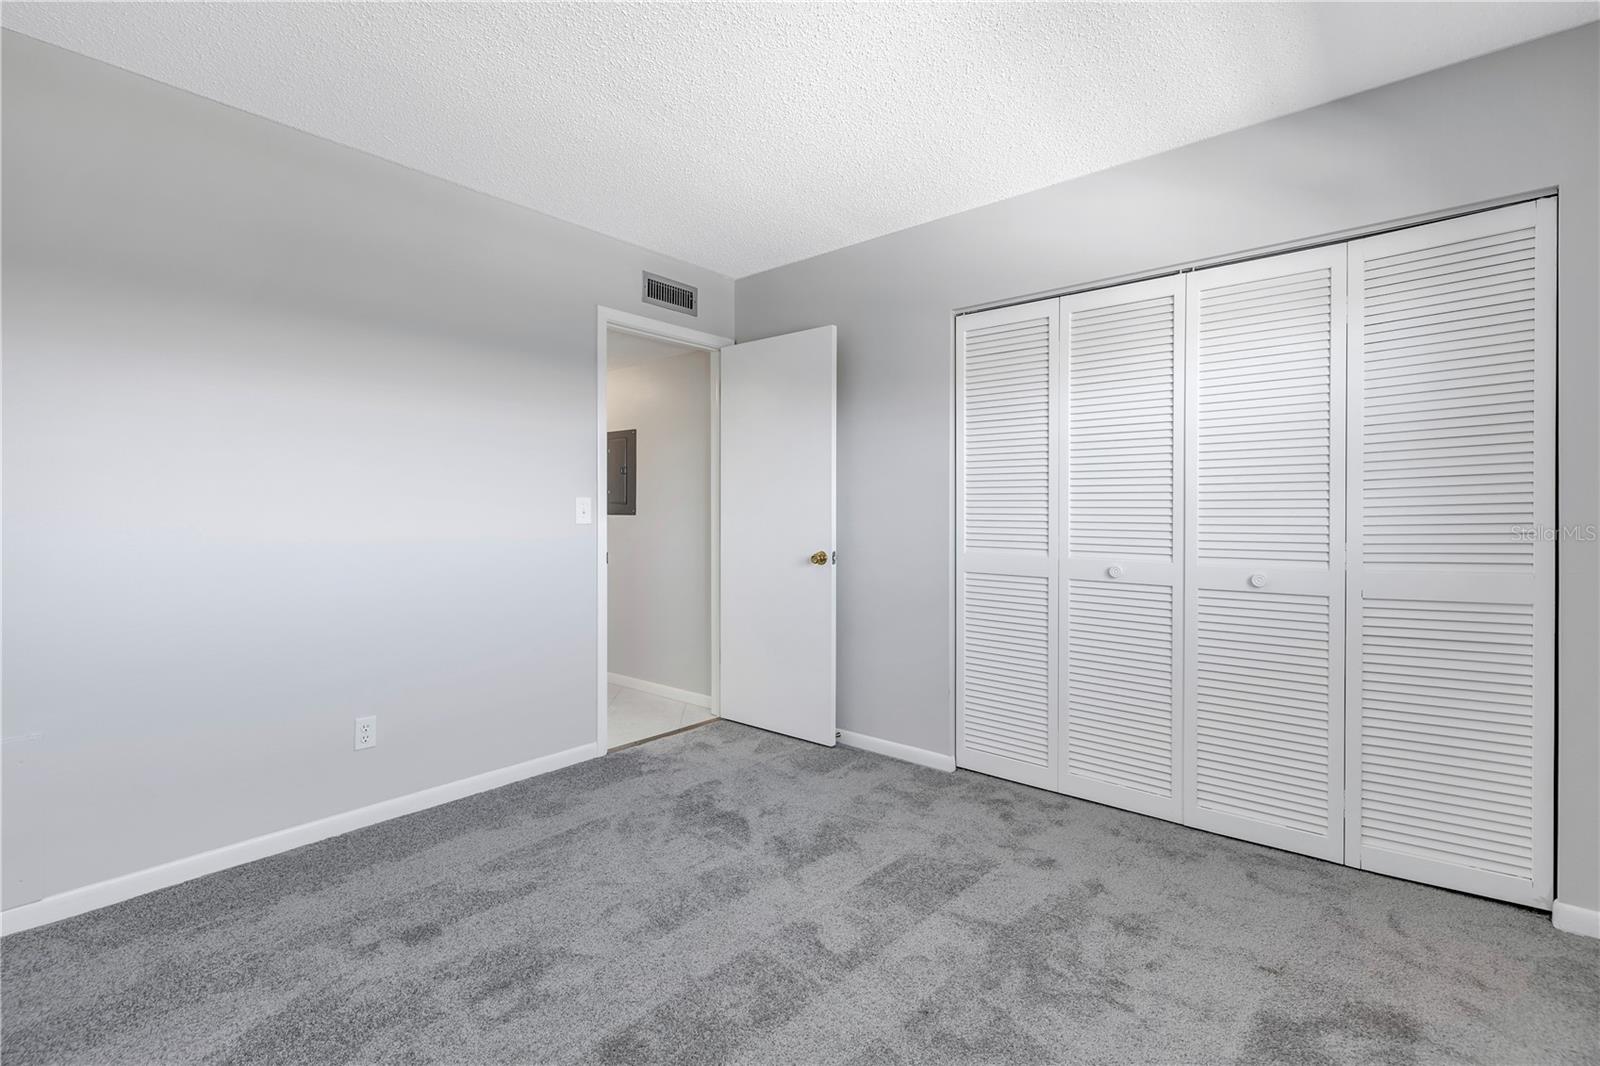 Large closet in guest bedroom